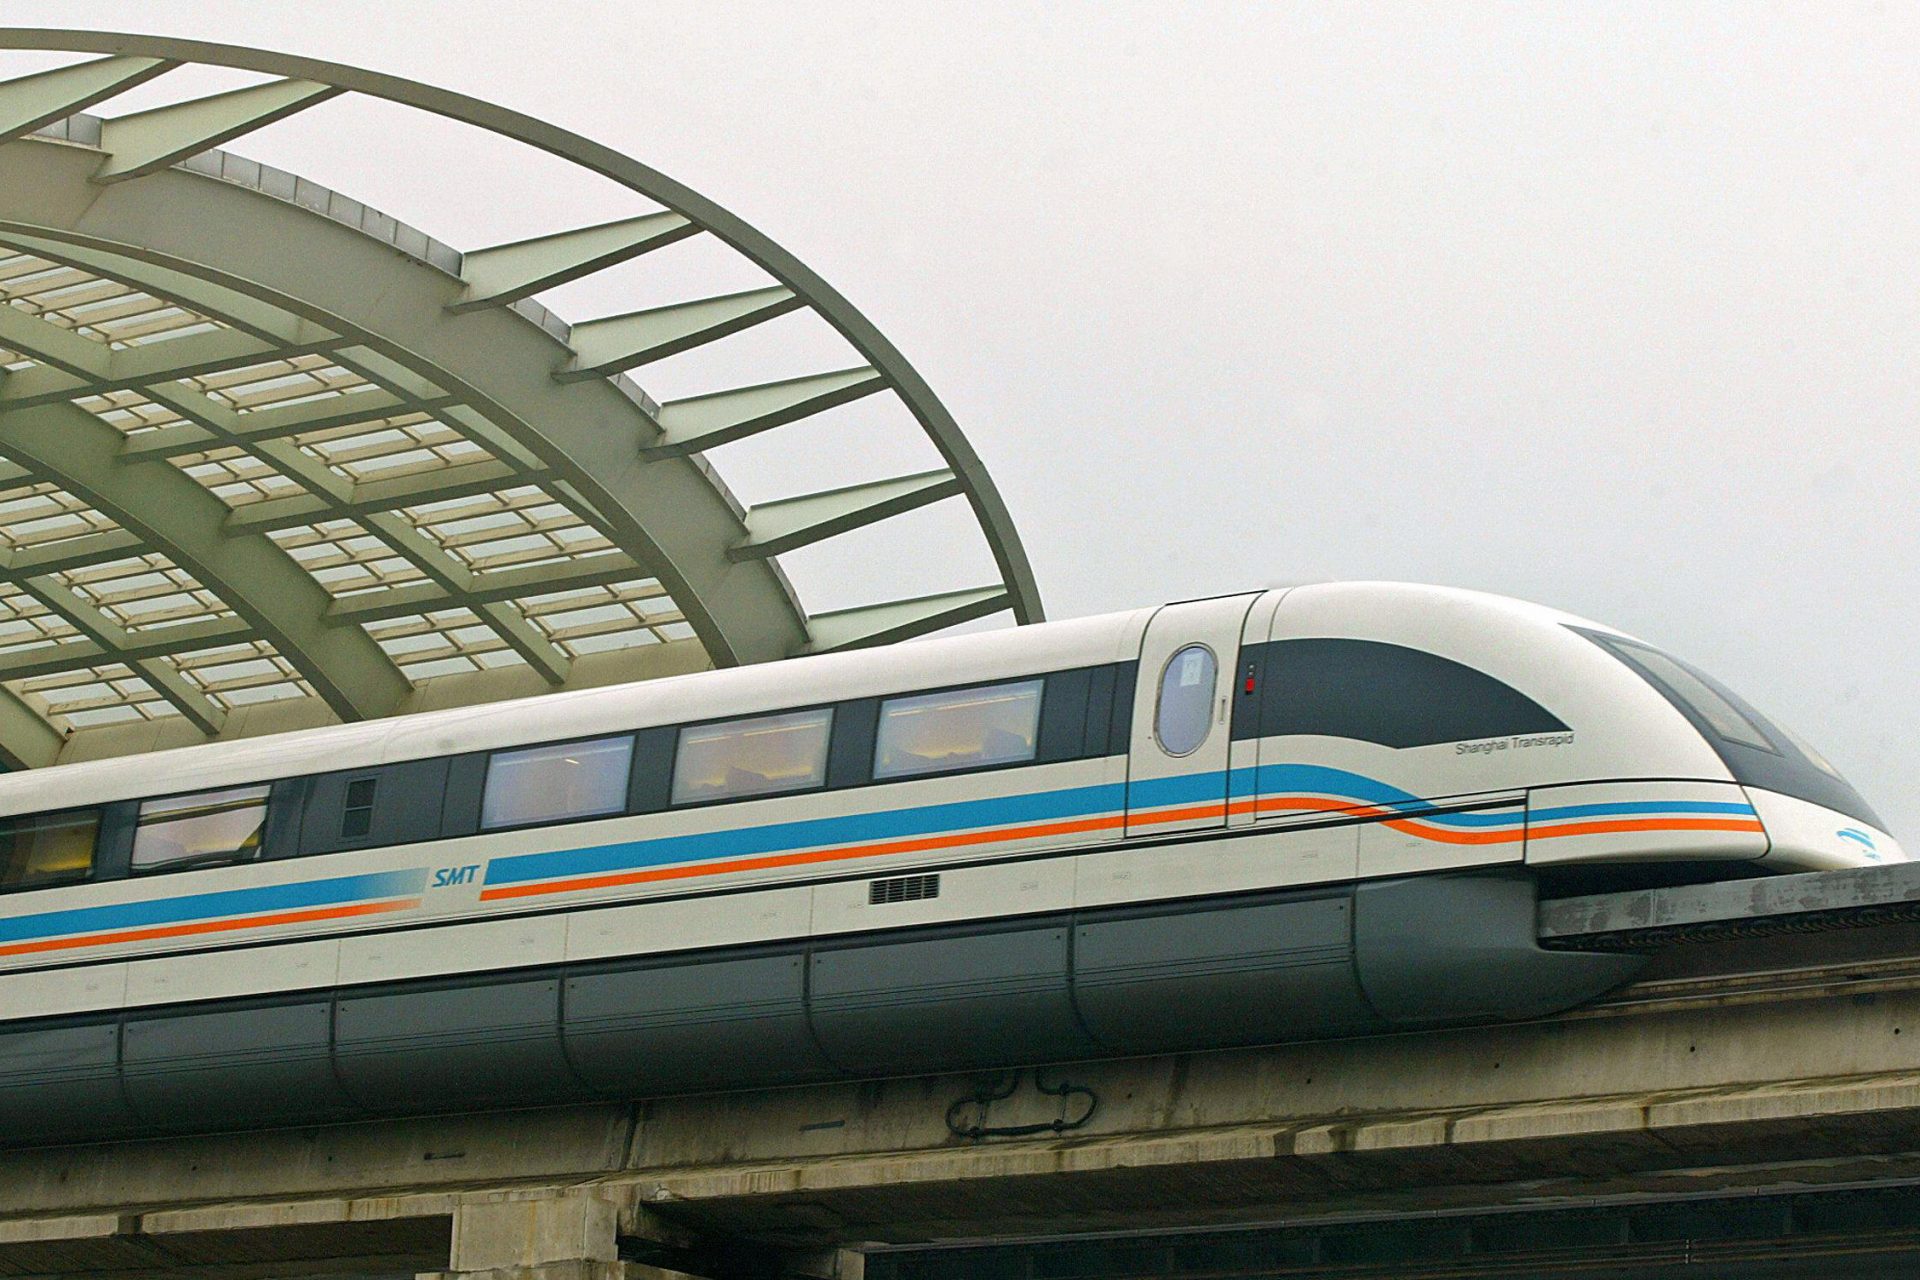 <p><span>The Shanghai Maglev is the world's fastest train and the only passenger train in the world that uses magnetic levitation (Maglev). Maglev trains are based on German technology, which allows the trains to travel on an elevated track using super-powerful magnets, which makes for a very smooth ride.</span></p>